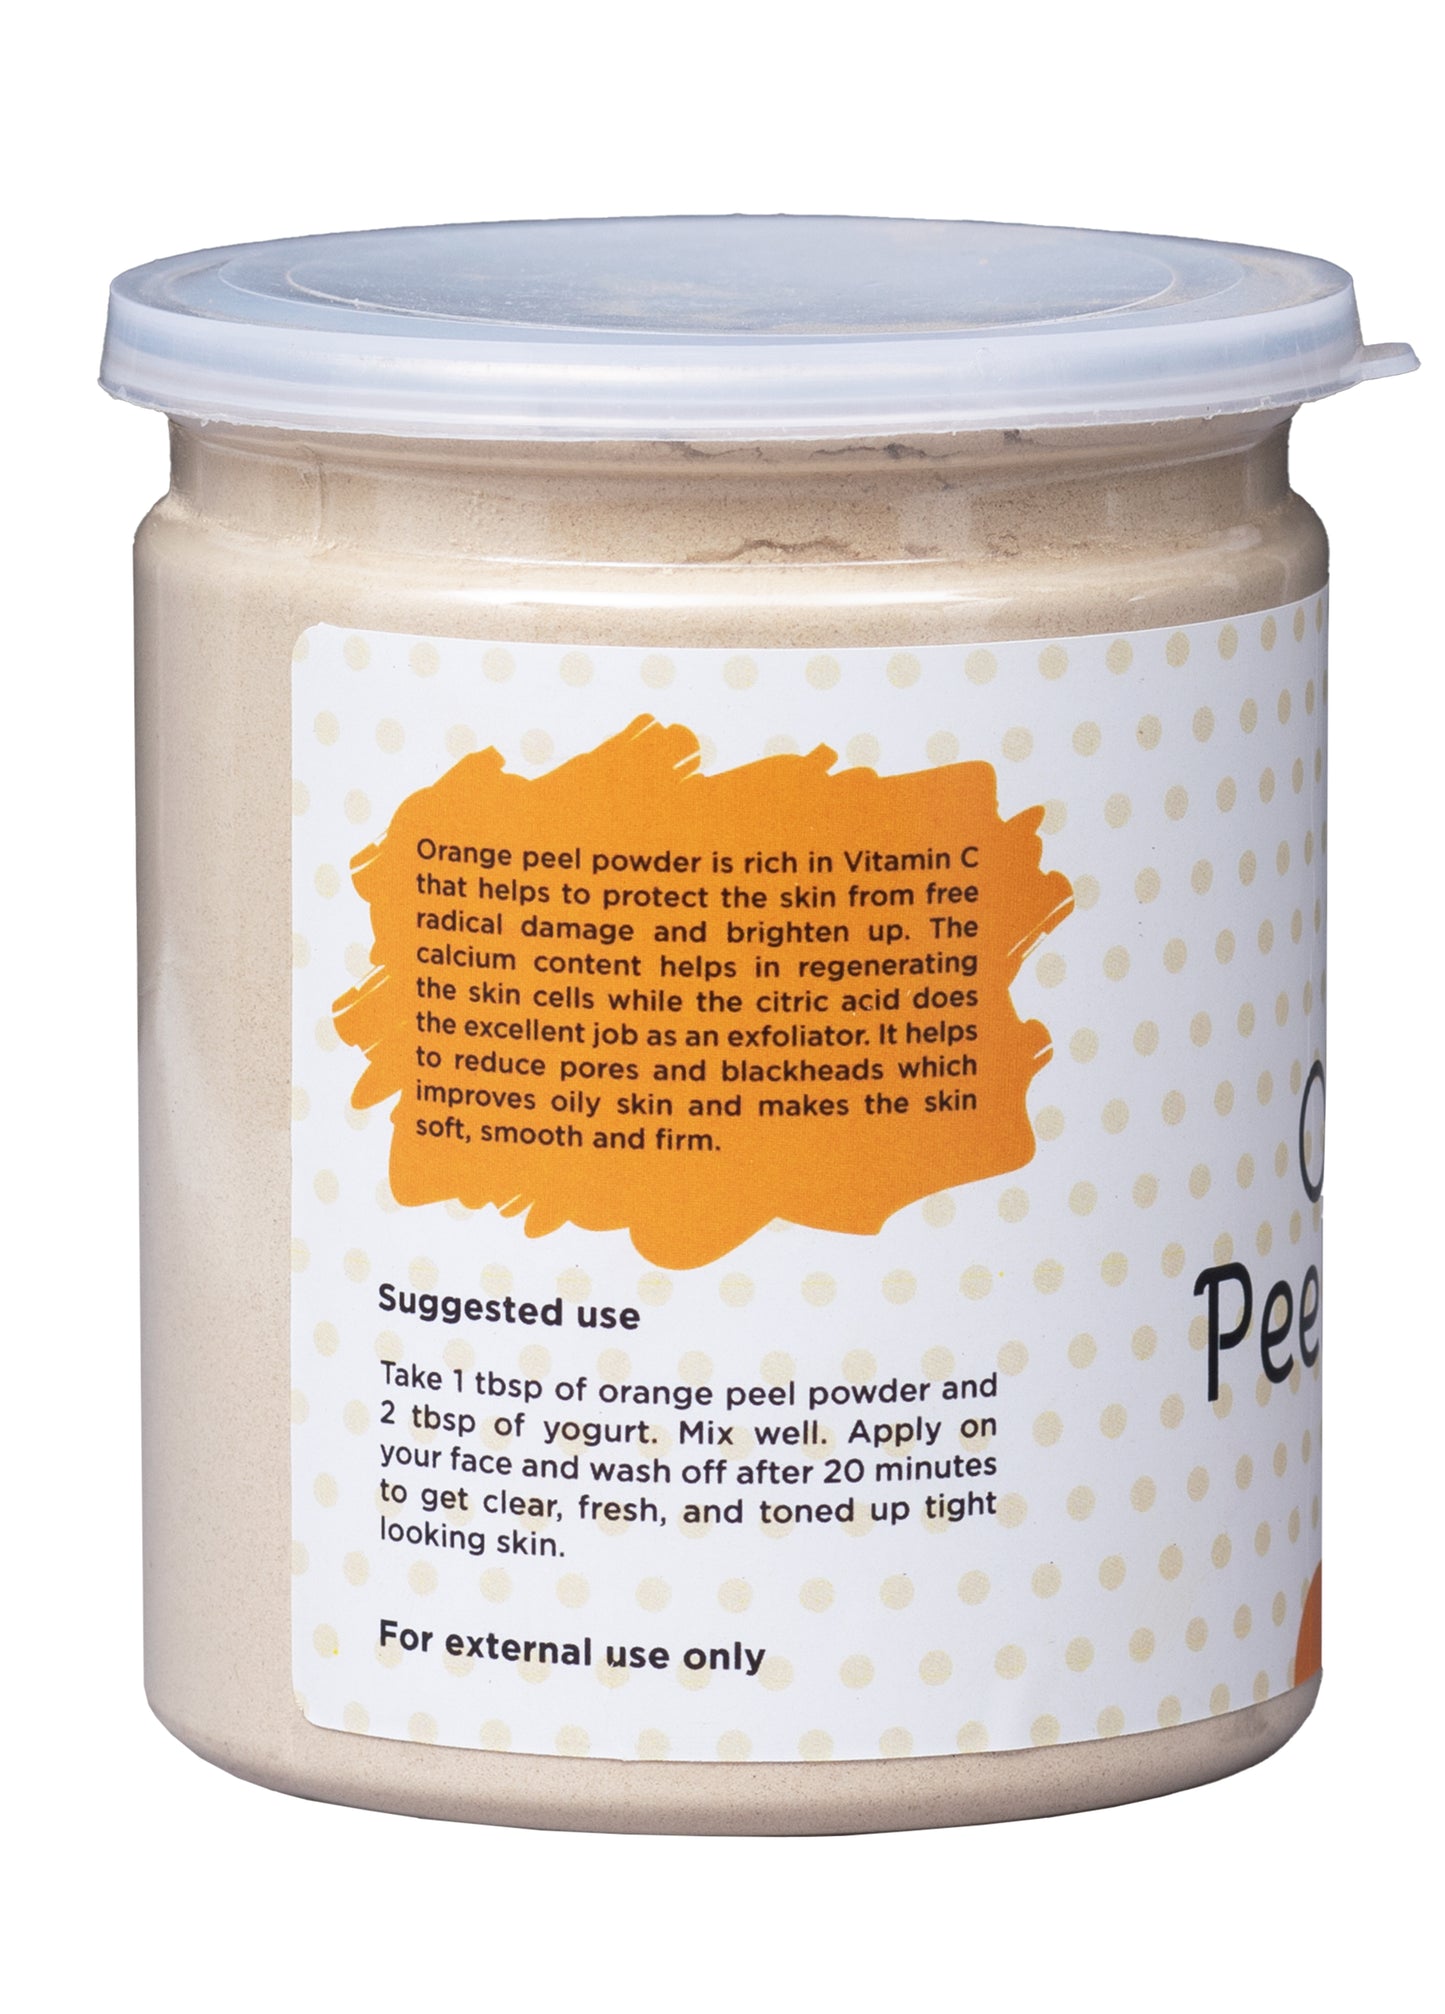 Orange peel powder 250 grams | 100% Natural care for Acne, Tan & Blackheads | Effective DIY face mask ingredient | Rich in Vitamin C | Helps get a glowing skin | by Yogi's Gift®